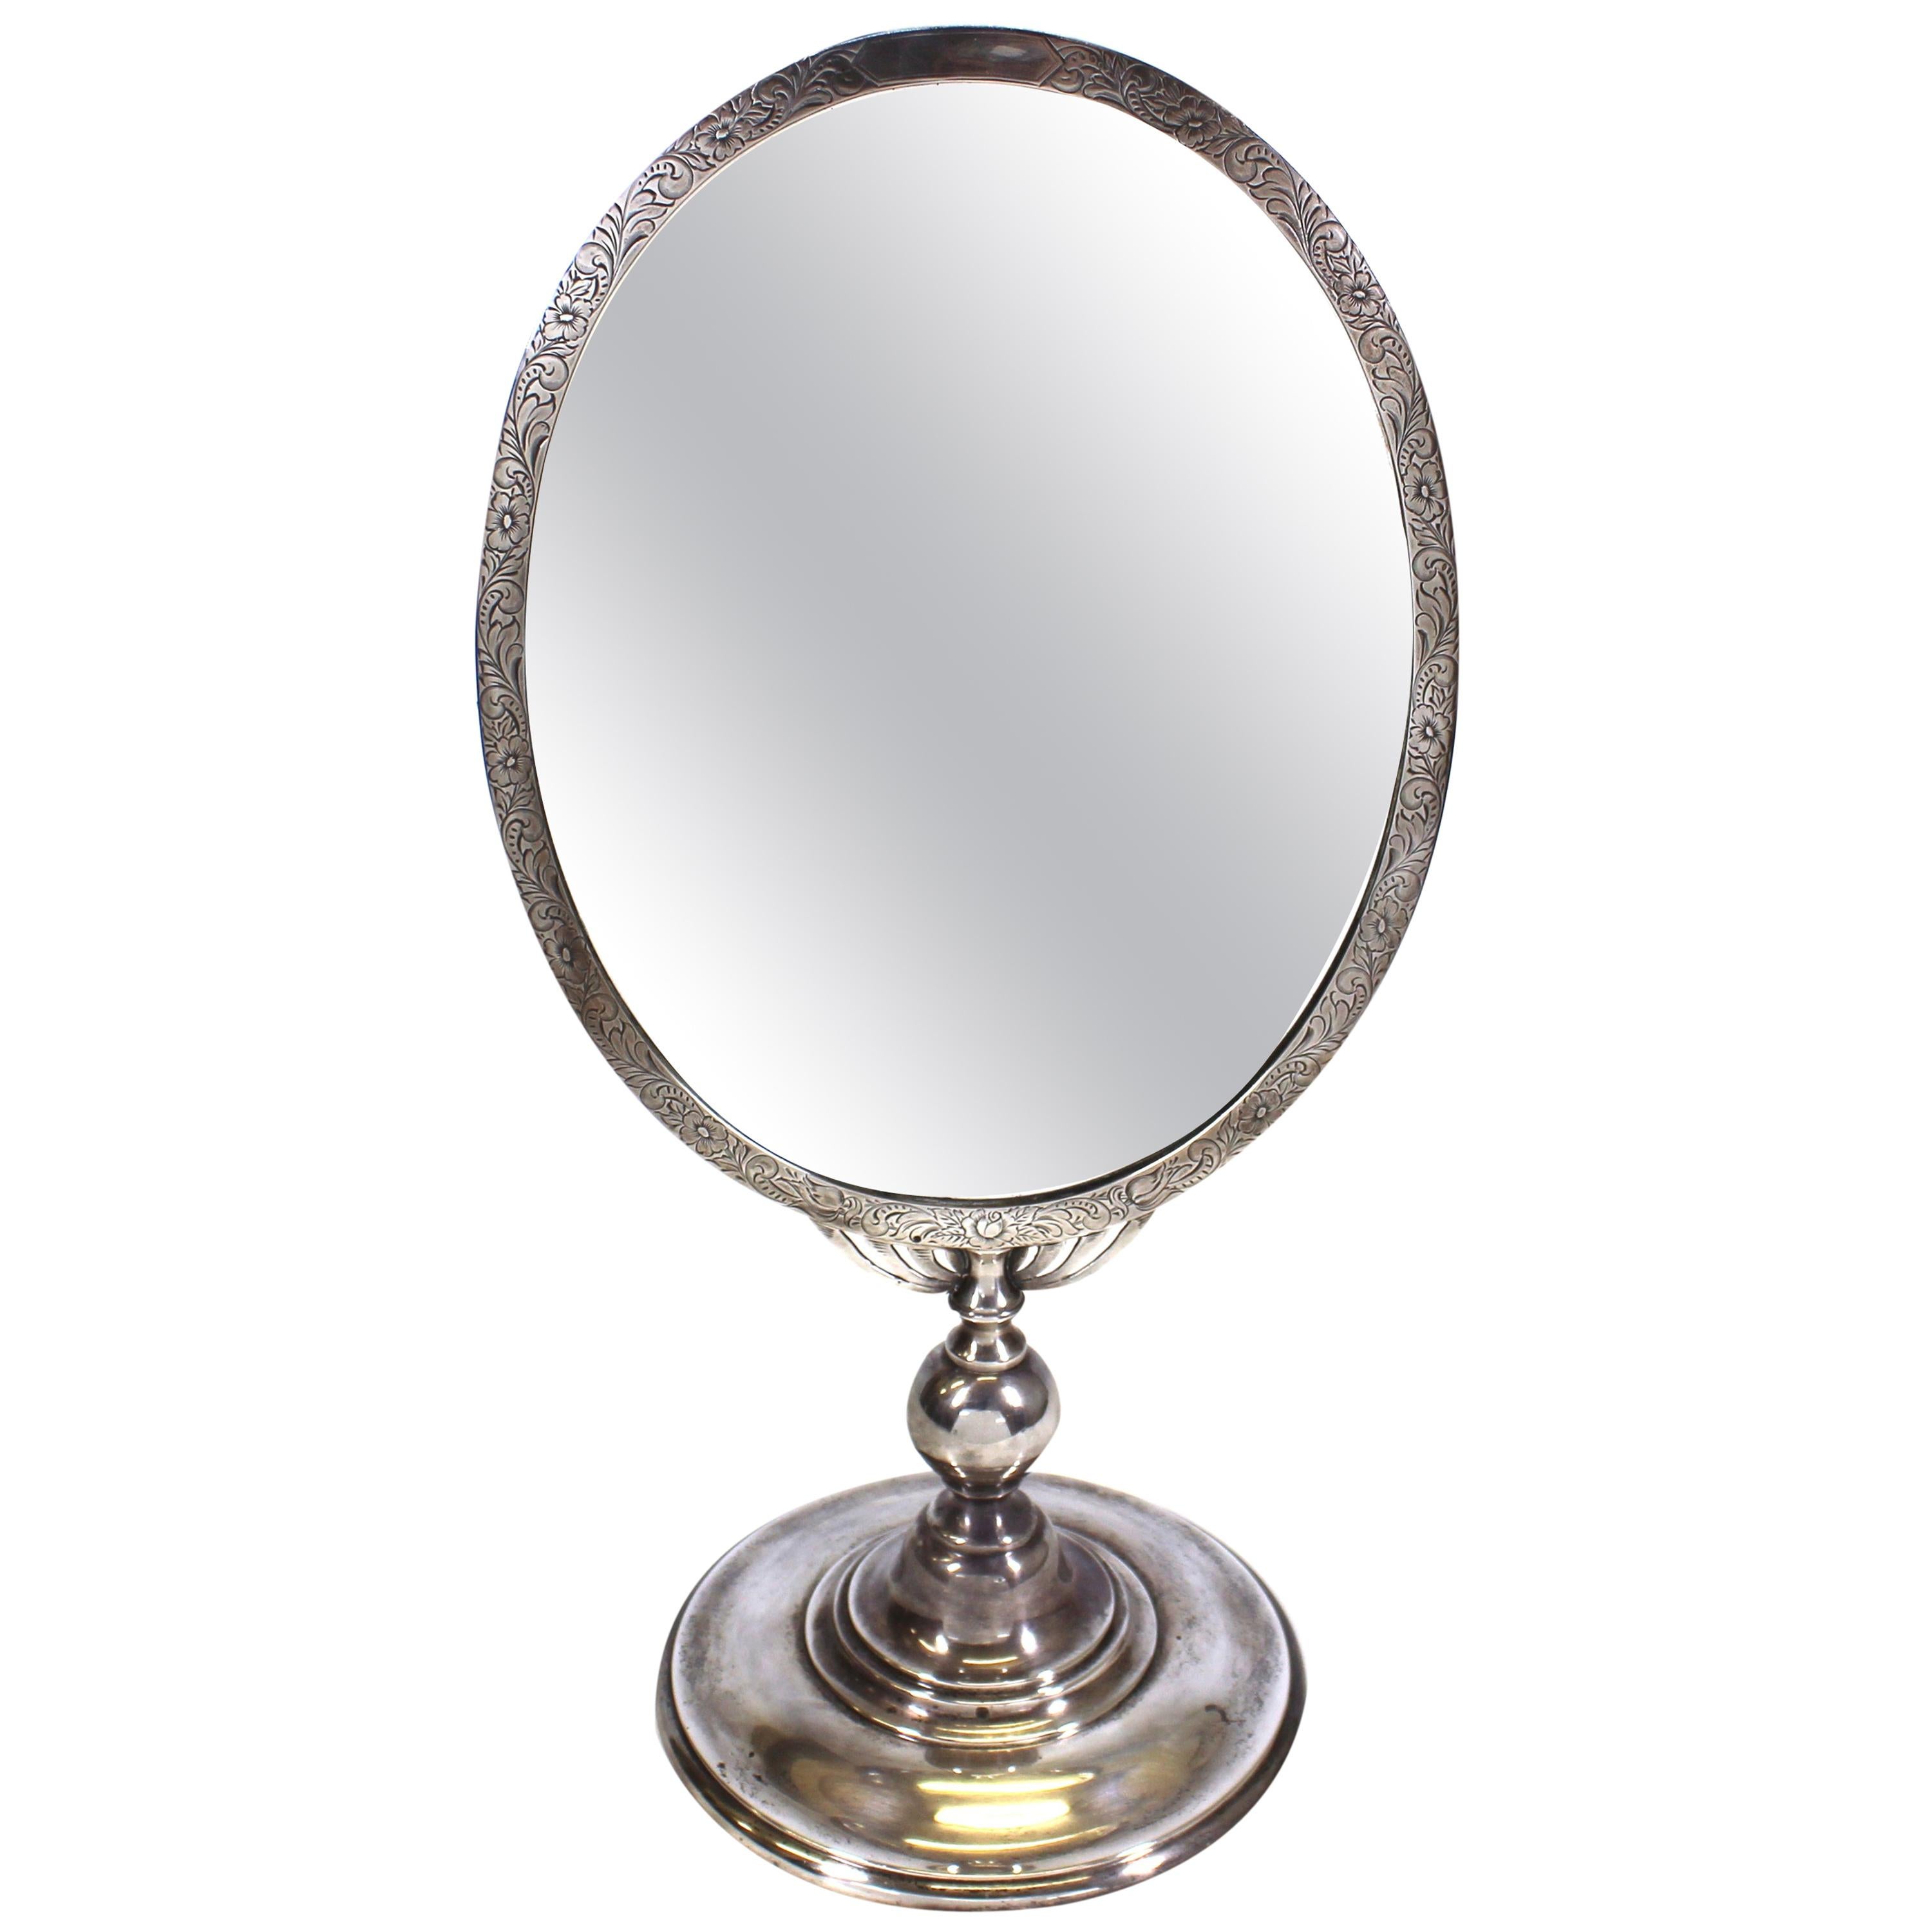 Mauser Manufacturing Company Sterling Silver Tilting Tabletop Mirror